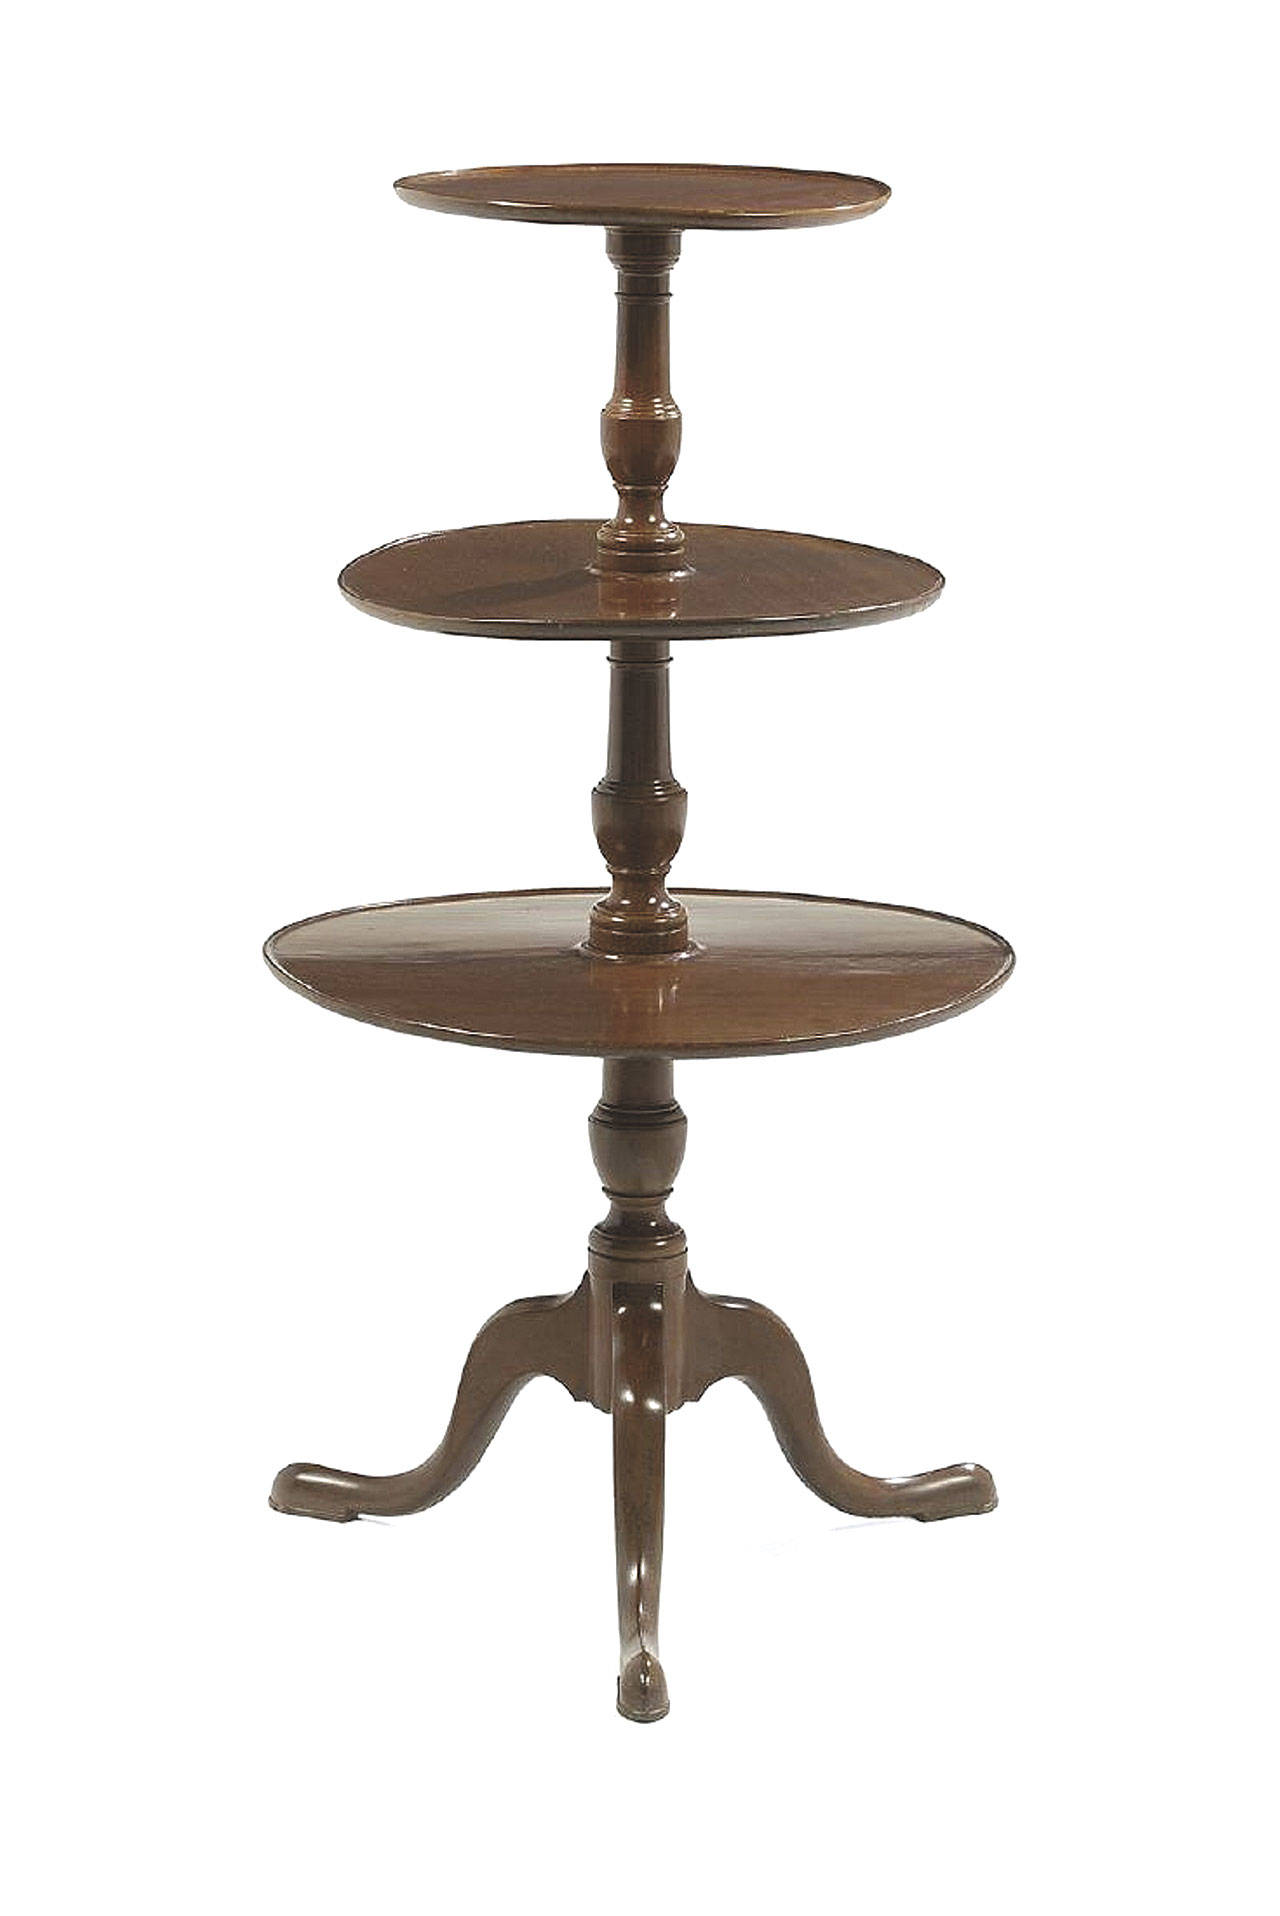 The auction catalog called this a Victorian mahogany three-tiered waiter in the Queen Anne taste made in the late 19th century, which is long way to say the table was made in a style that was in fashion 150 years earlier. (Cowles Syndicate Inc.)